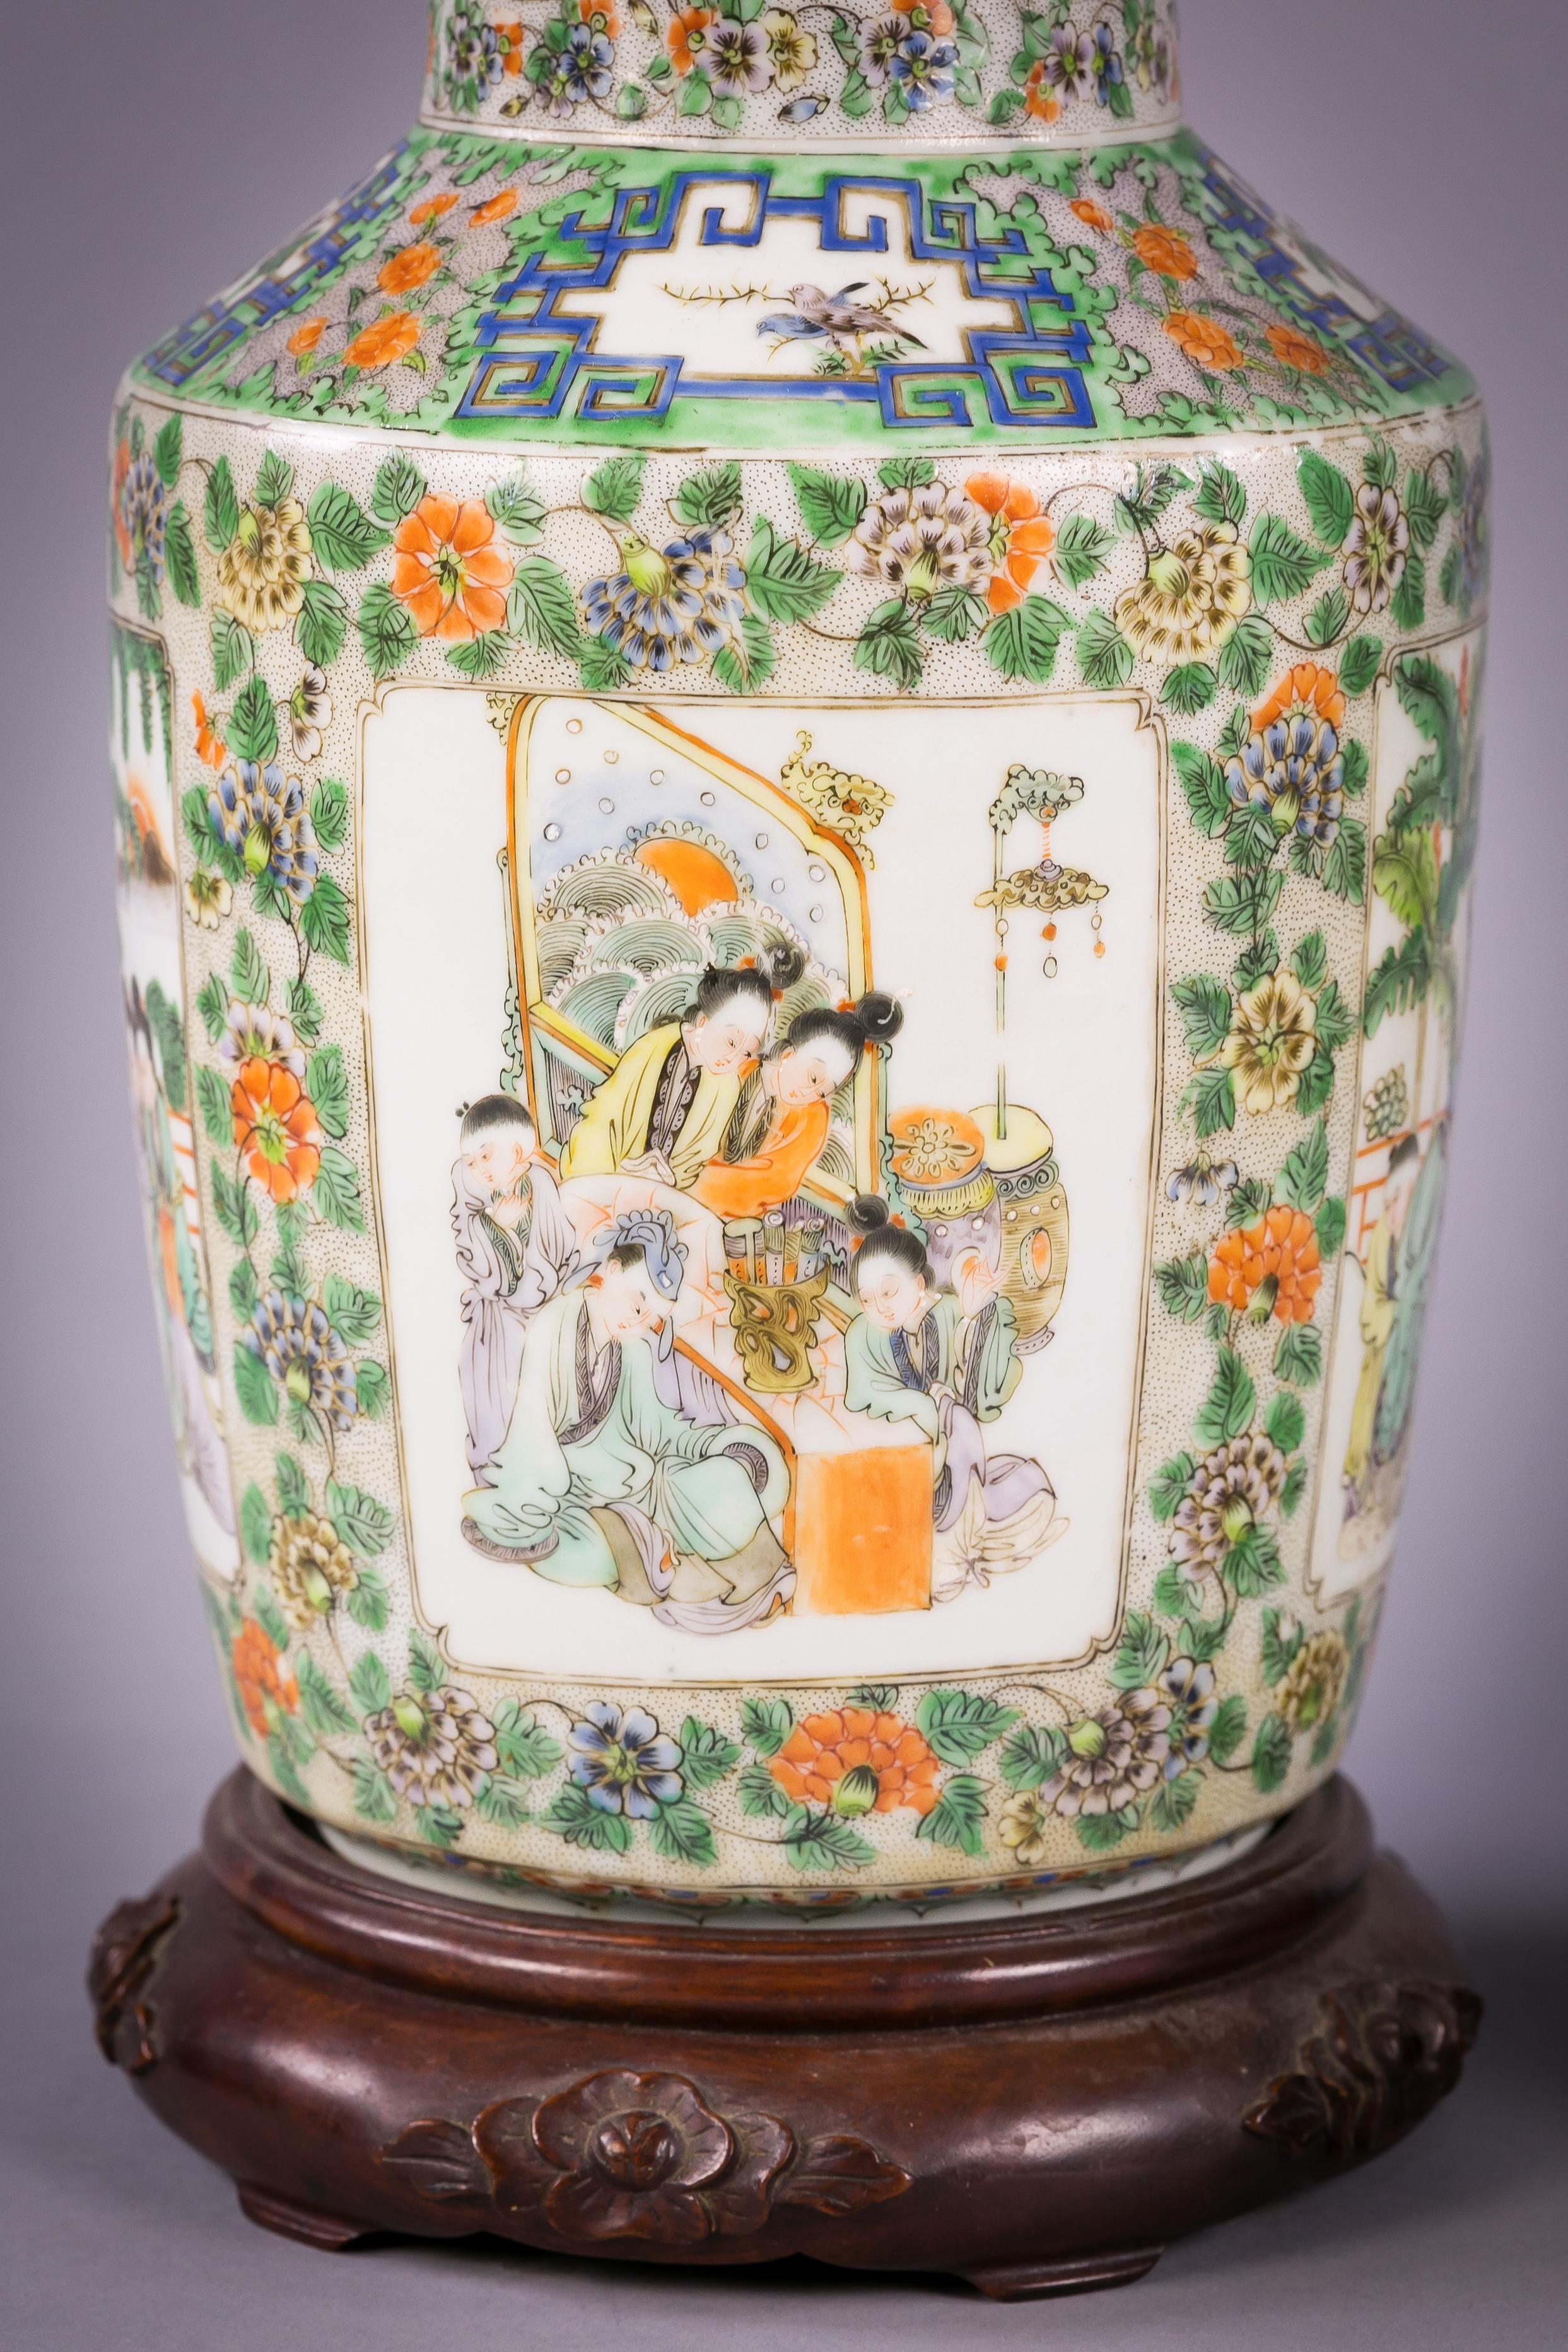 Pair of Chinese porcelain Canton Famille rose vase mounted as lamps, 19th century

Measure: height of vase 13.25